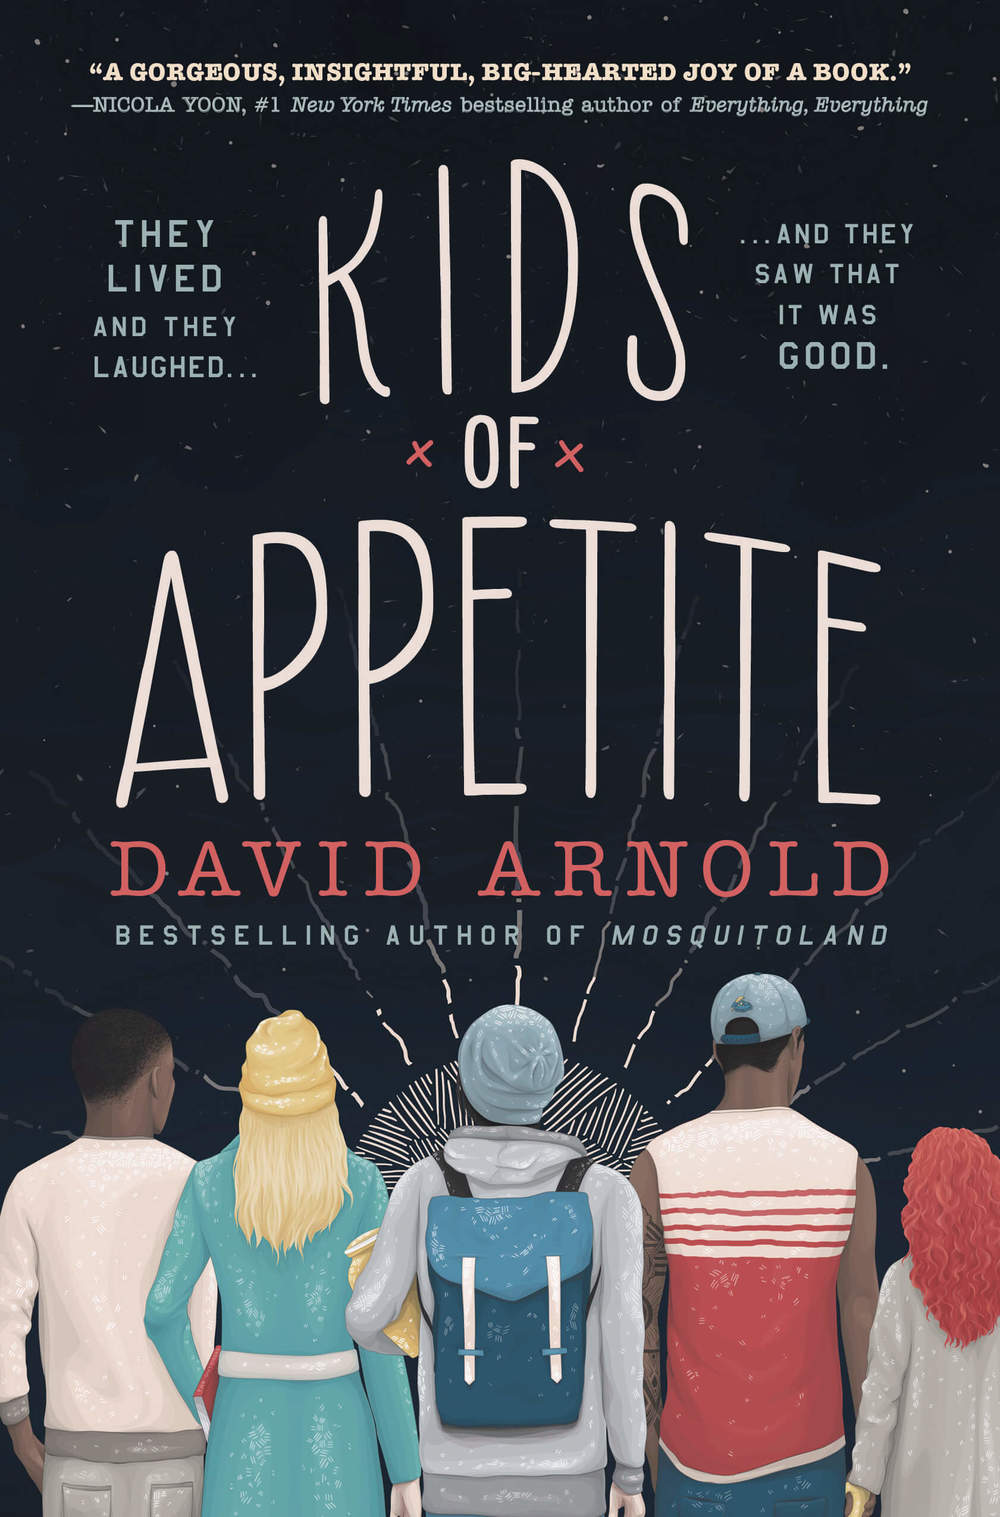 Kids of Appetite by David Arnold